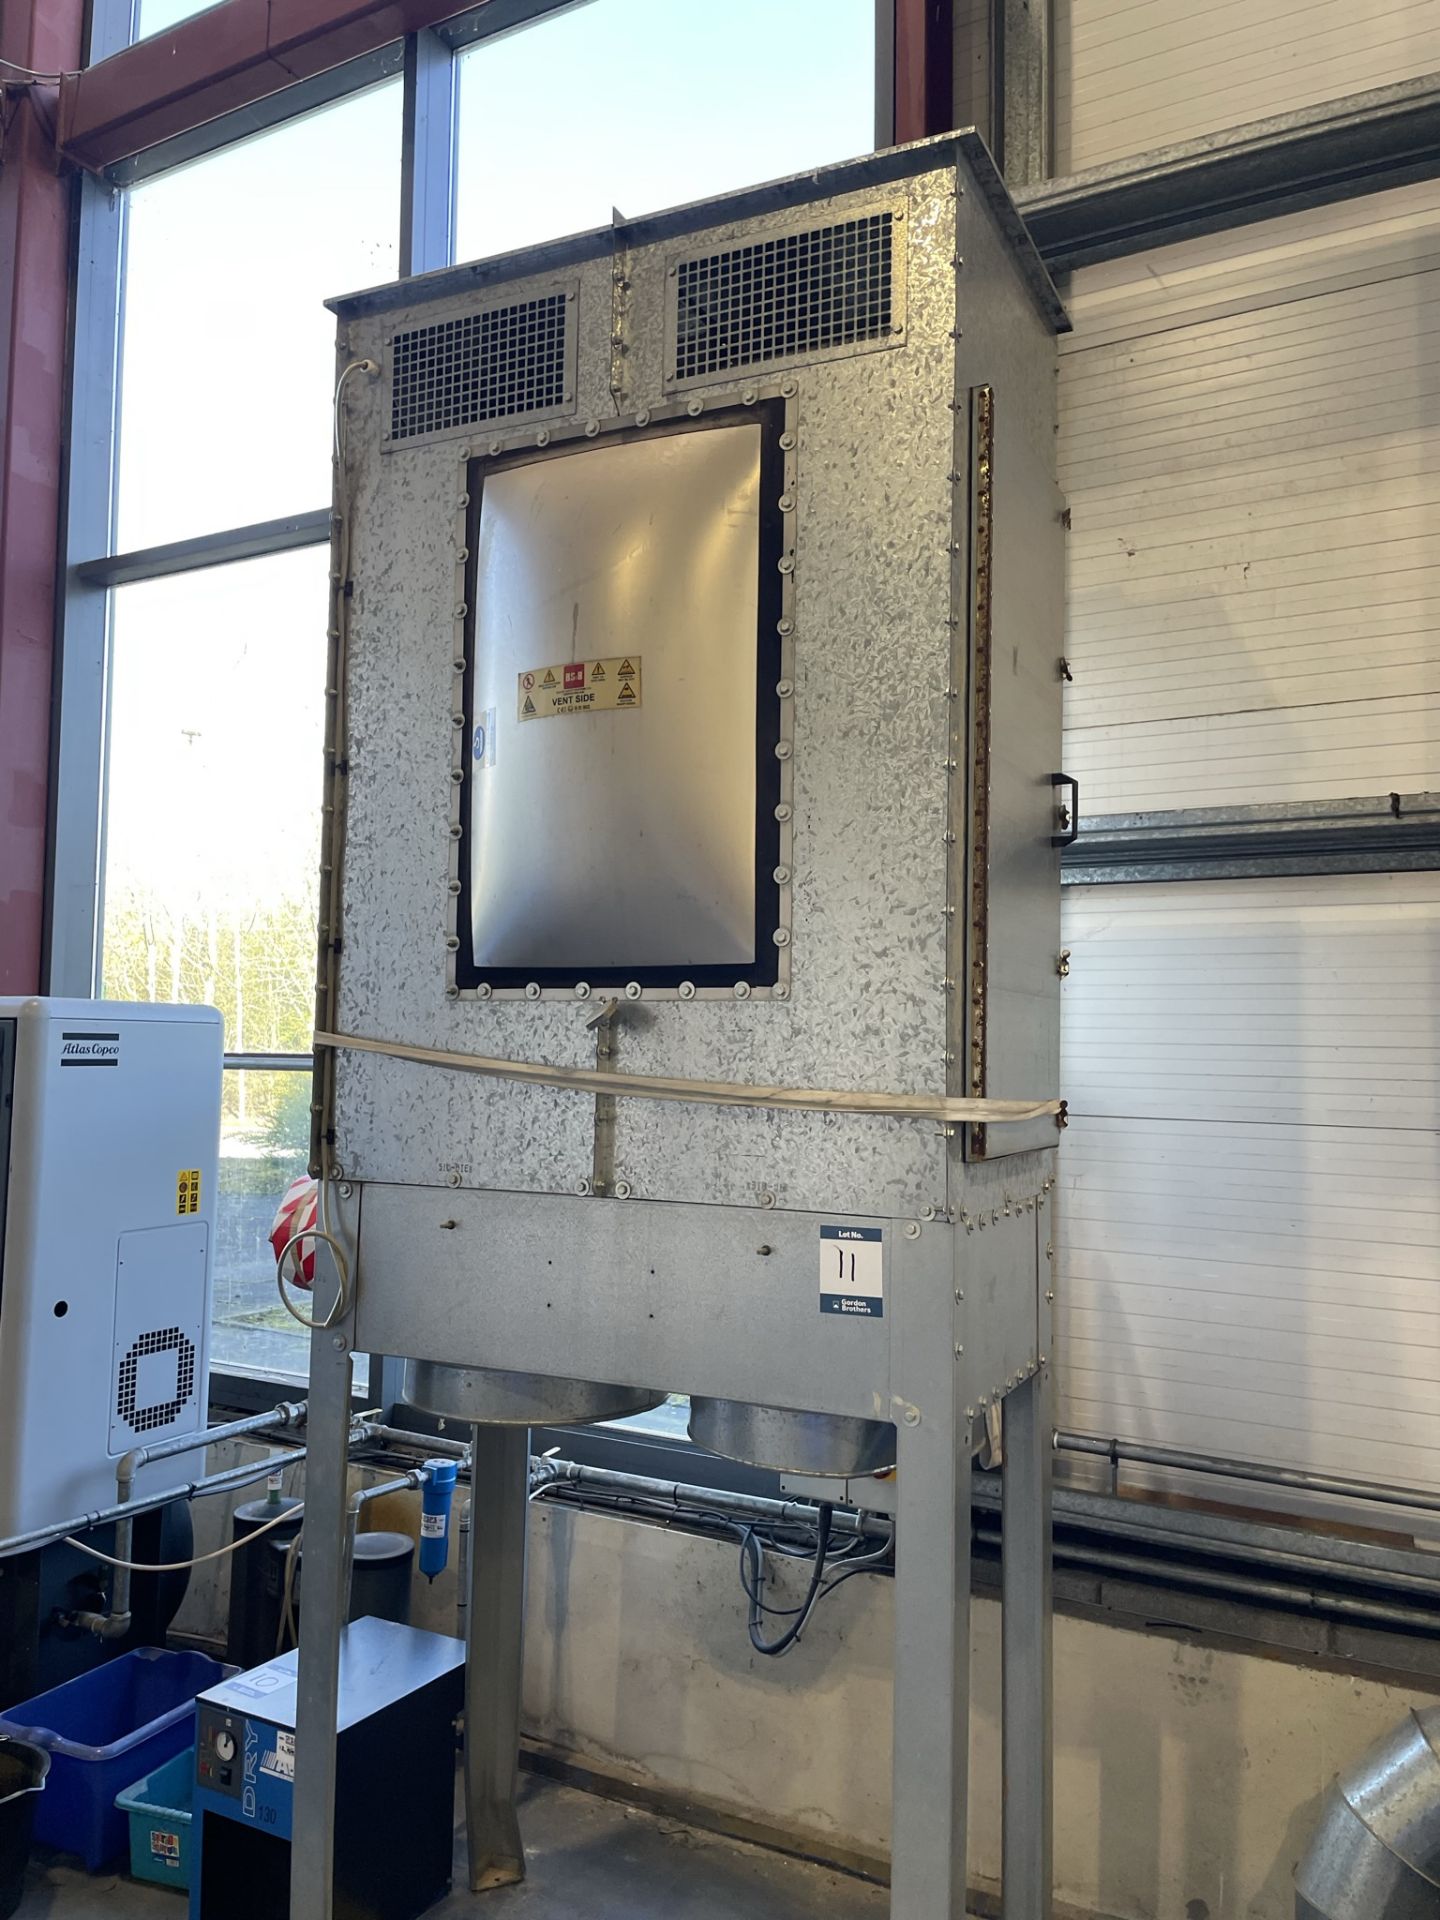 Fabricated dust collection hopper and stand, approx. size 1200 x 600 x 1900mm